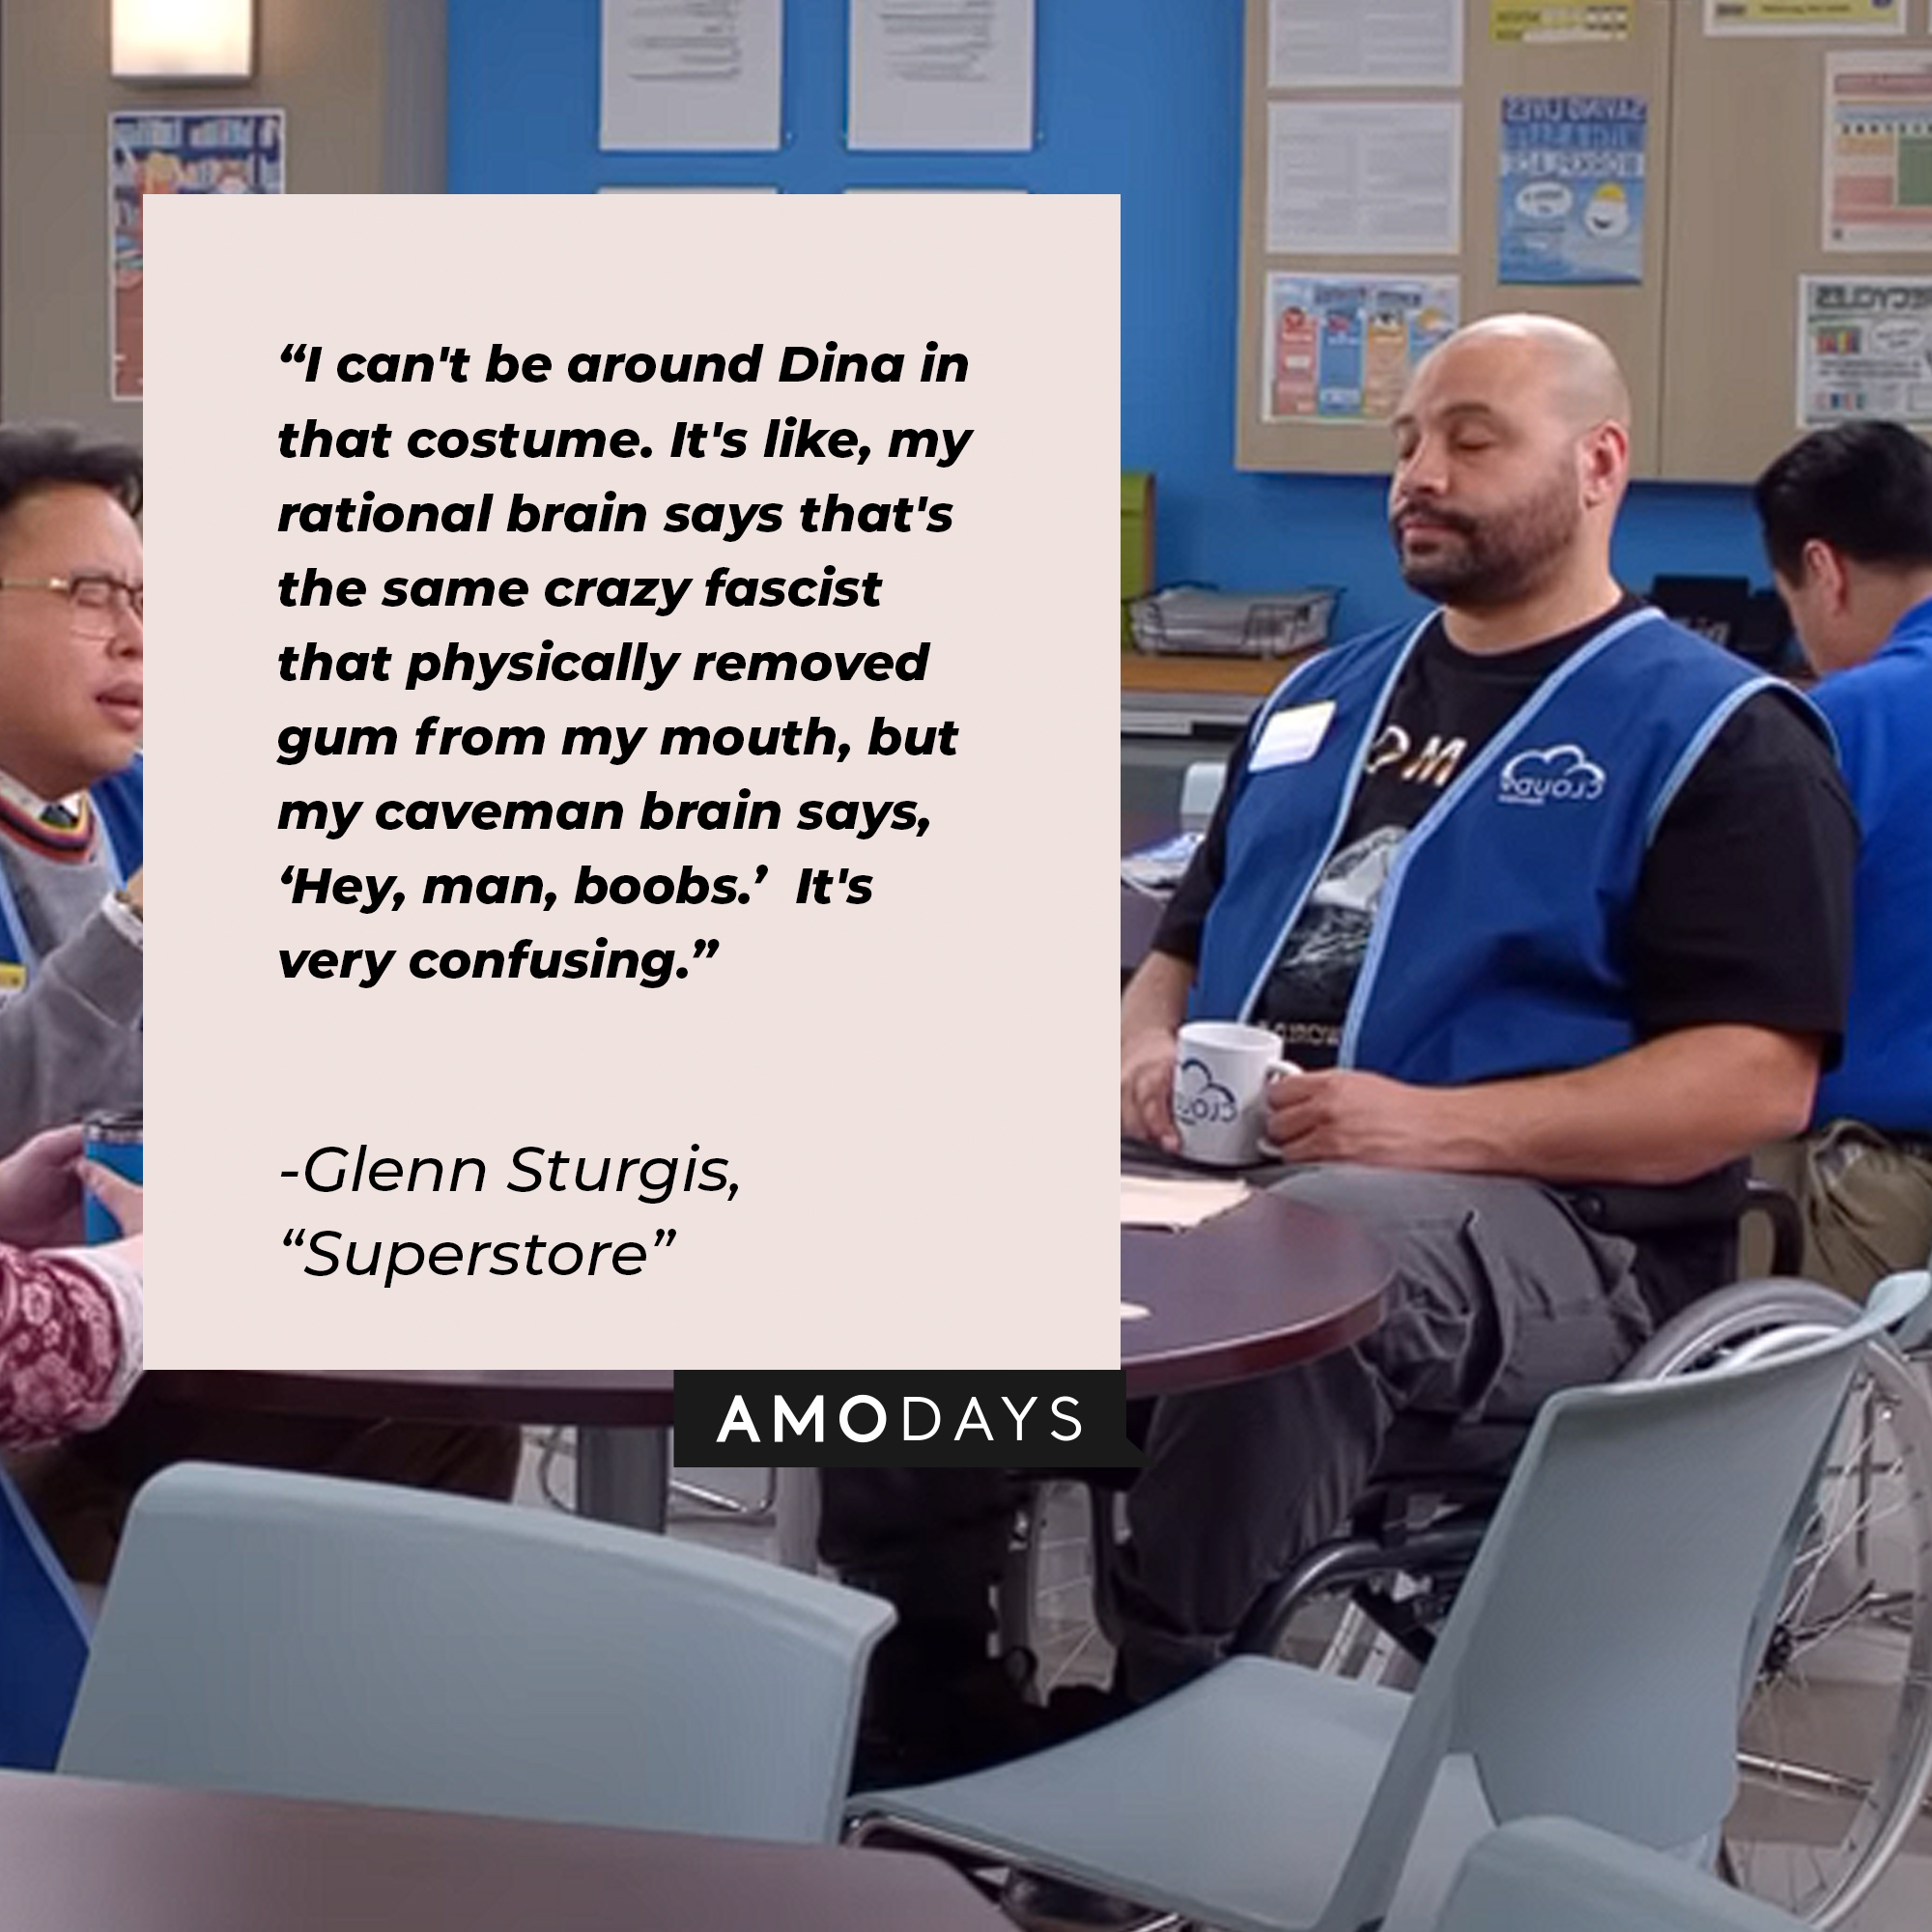 Image of  Garrett McNeill with the quote: “I can't be around Dina in that costume. It's like, my rational brain says that's the same crazy fascist that physically removed gum from my mouth, but my caveman brain says, ‘Hey, man, boobs.’  It's very confusing.” | Source: Youtube.com/NBCSuperstore